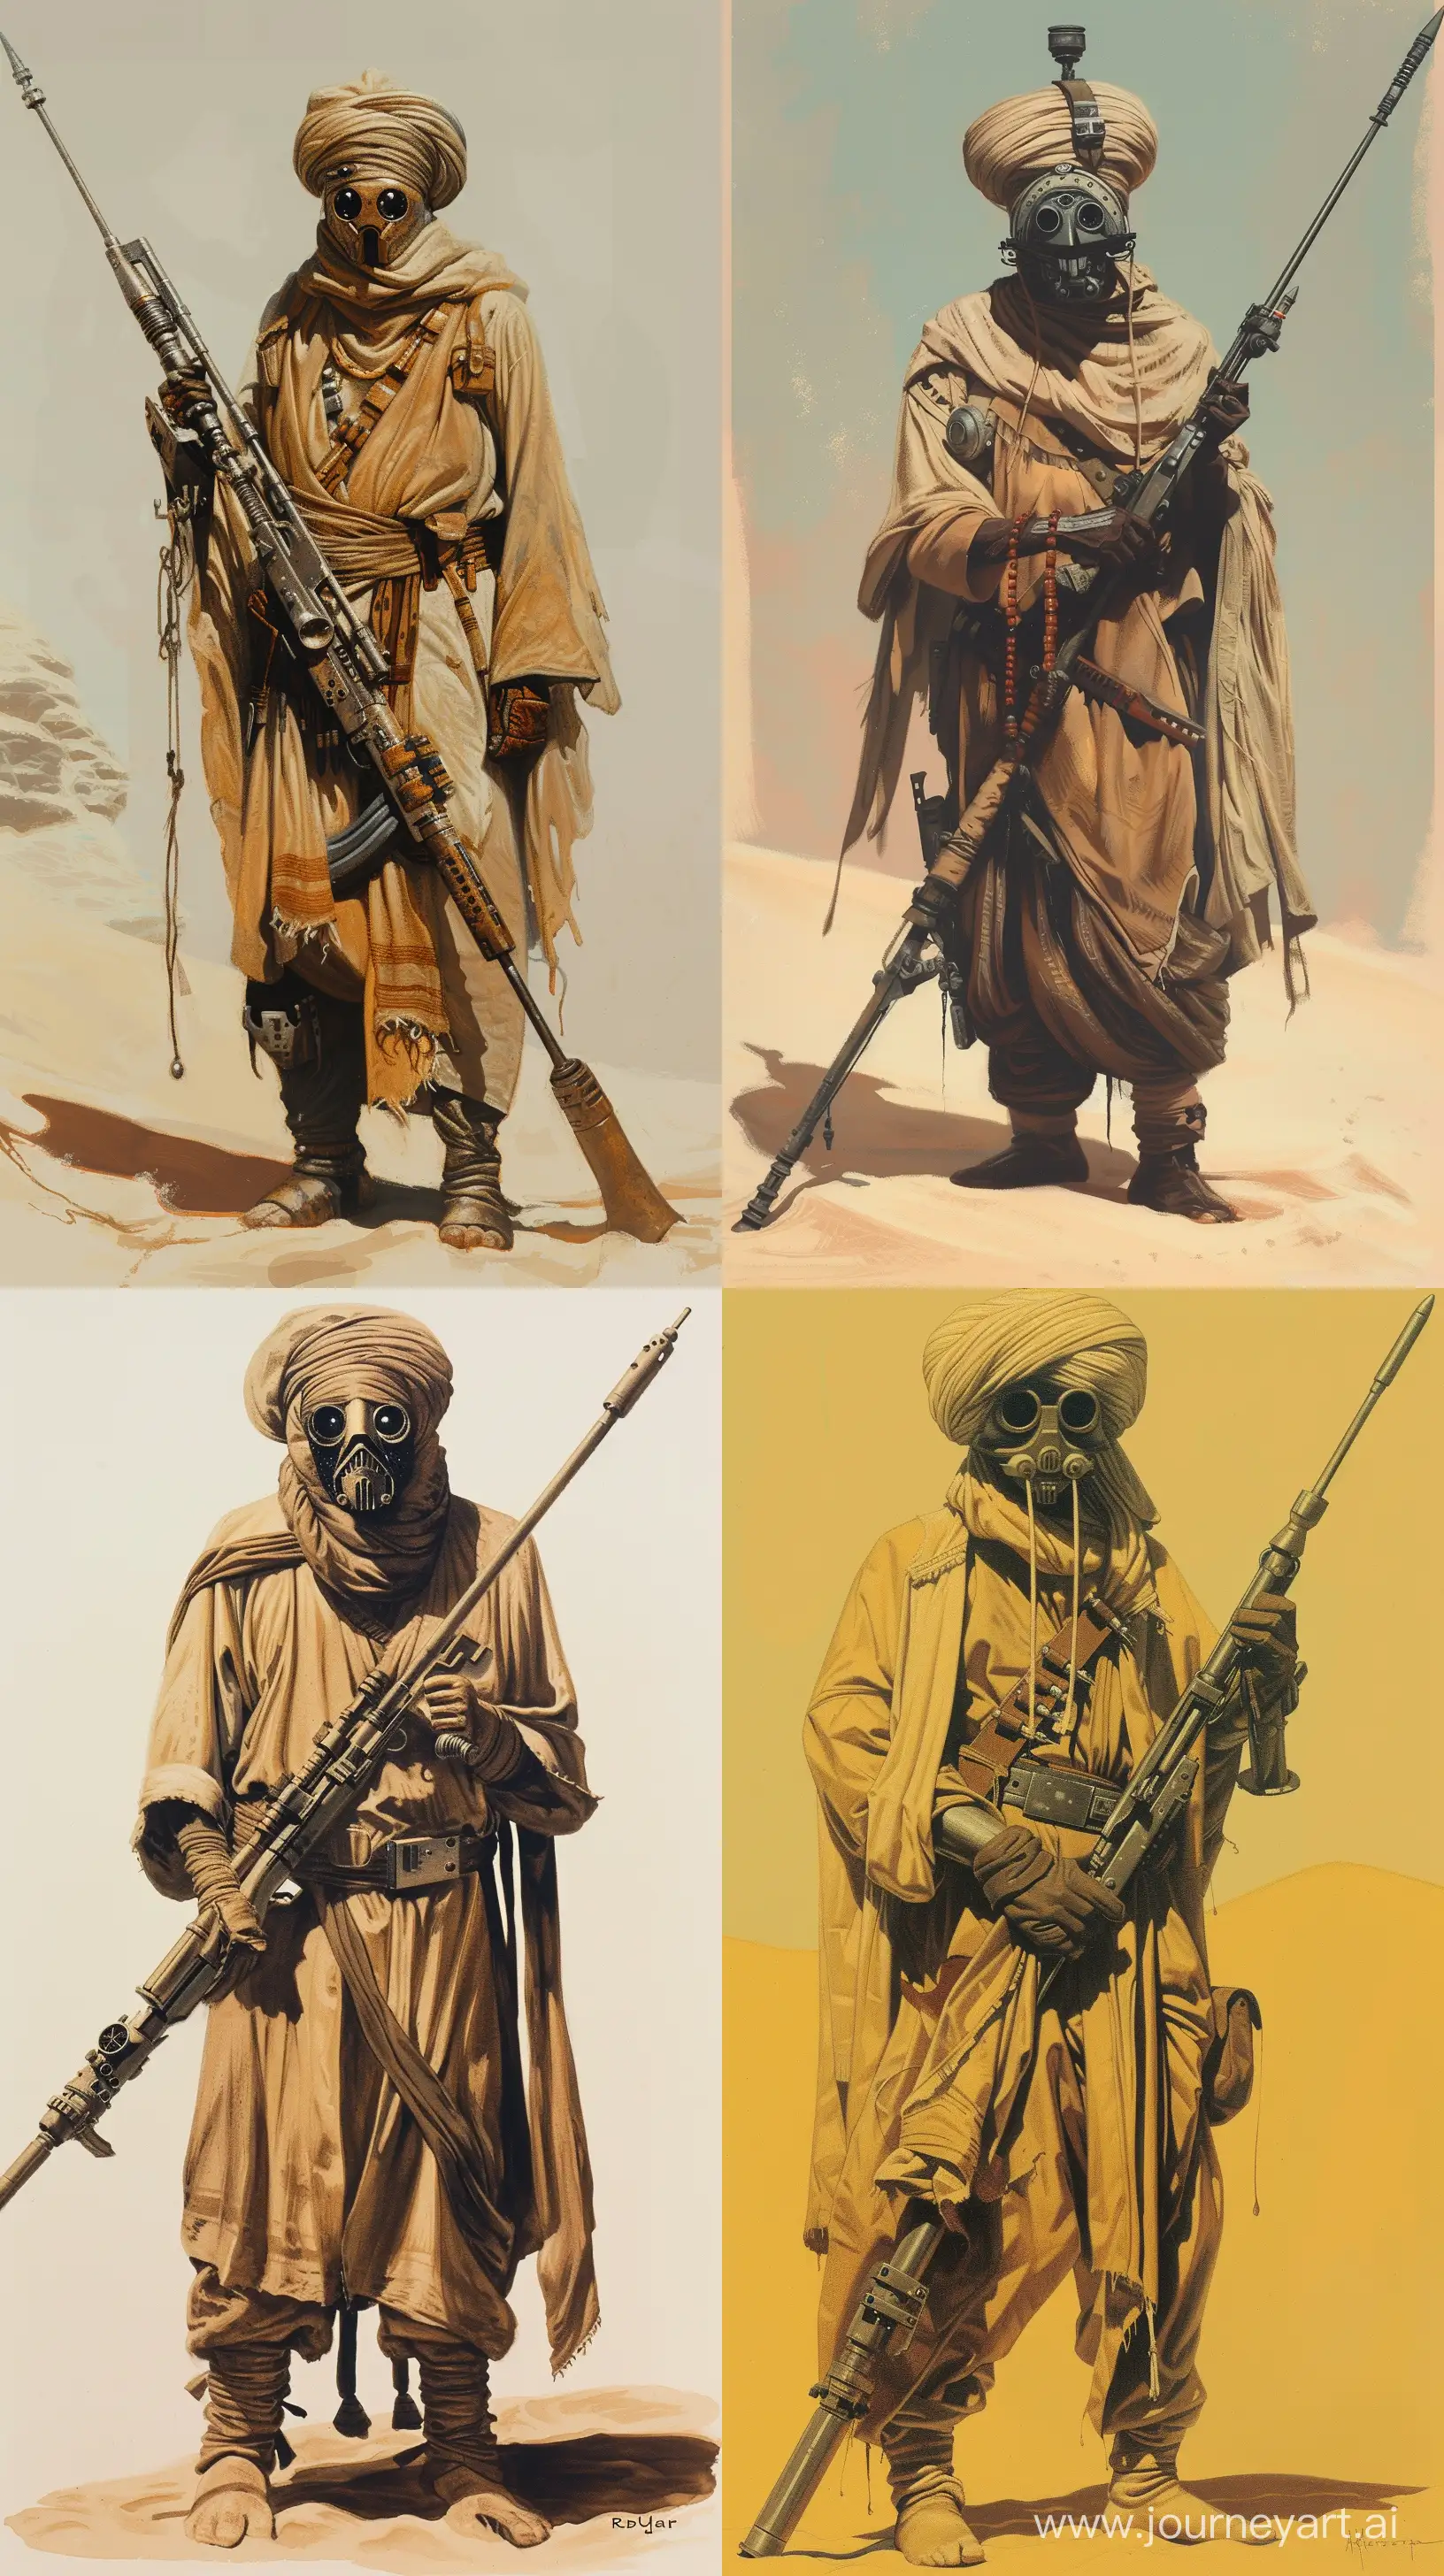 Retro-Science-Fiction-Art-Desert-Assassin-Droid-with-Turban-and-Rifle